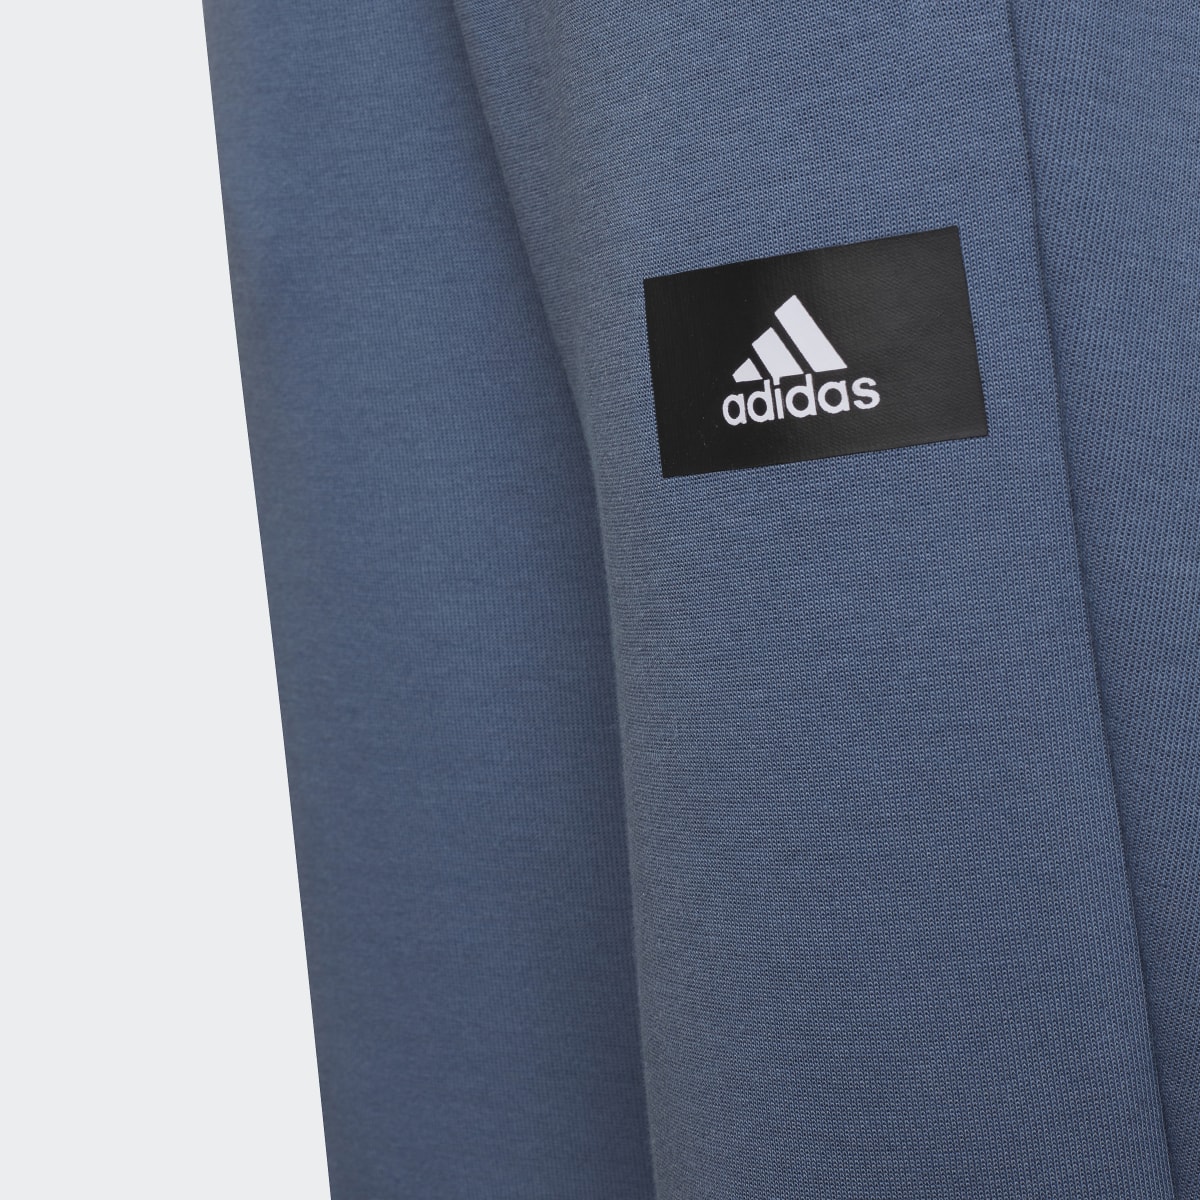 Adidas Future Icons 3-Stripes Tapered-Leg Tracksuit Bottoms. 4